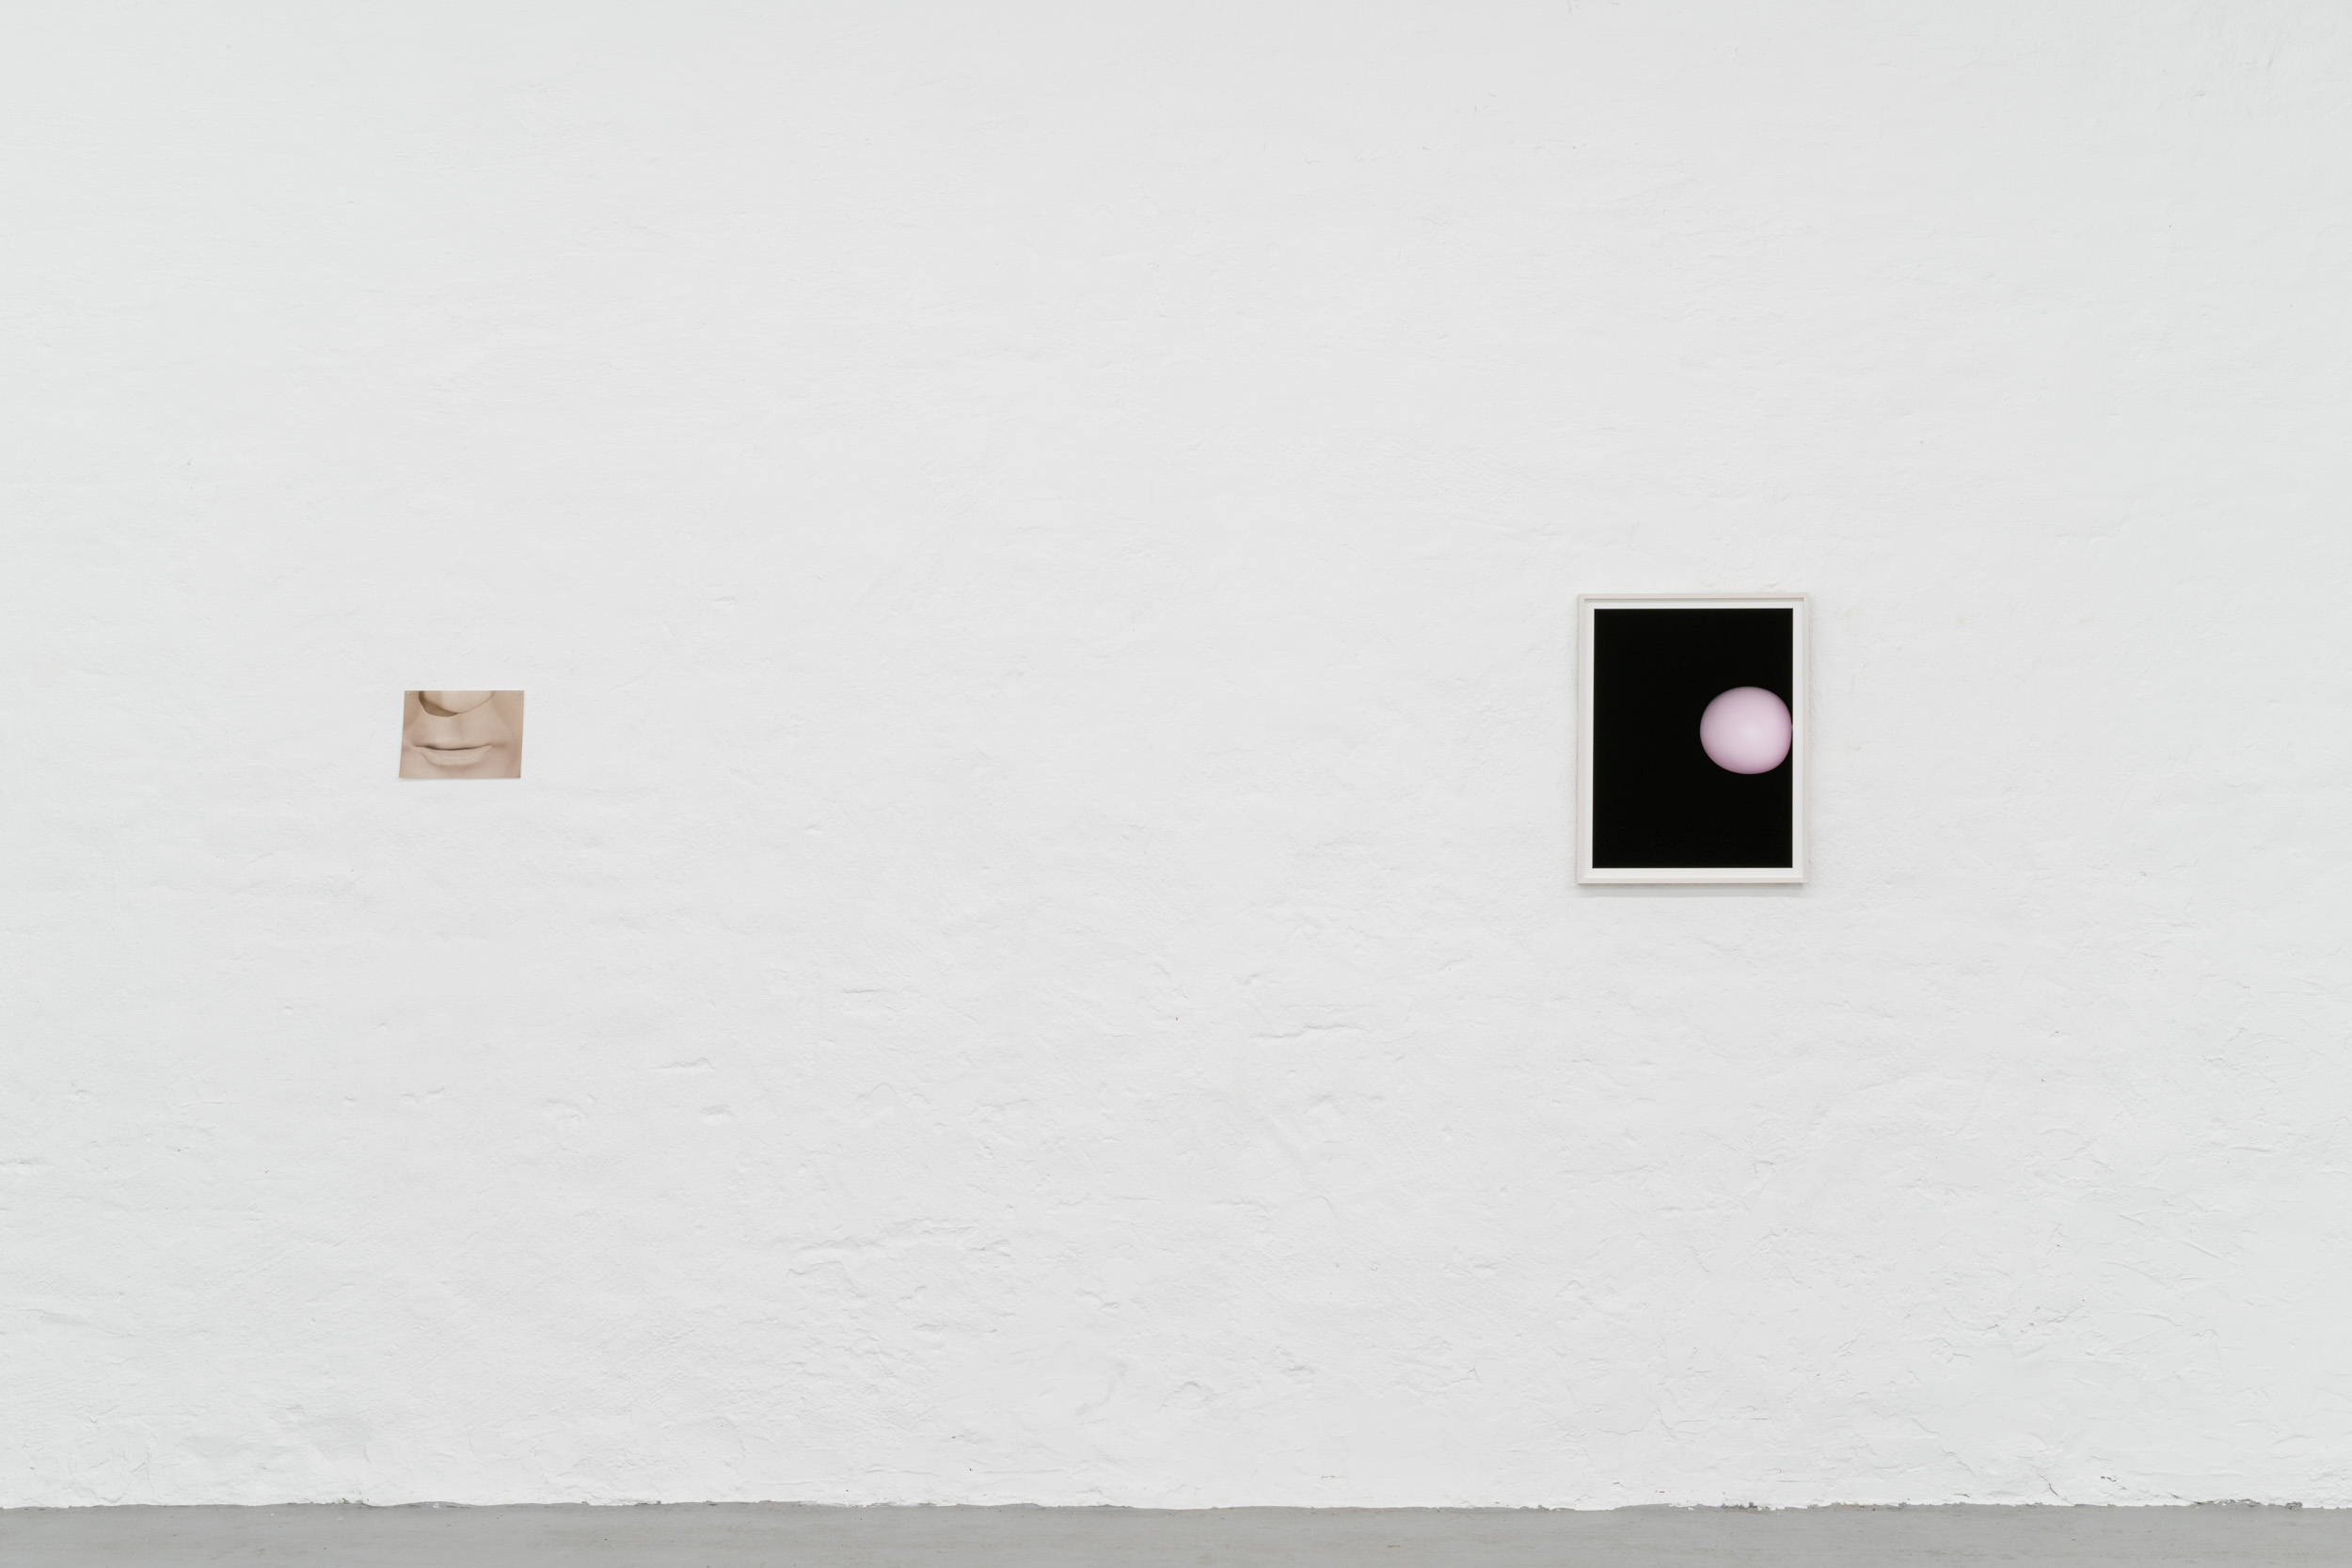 SCROLL by CLAUDIA KUGLER - Installation view - 13.05.2022 Studio For Artistic Research Claudia Kugler Düsseldorf